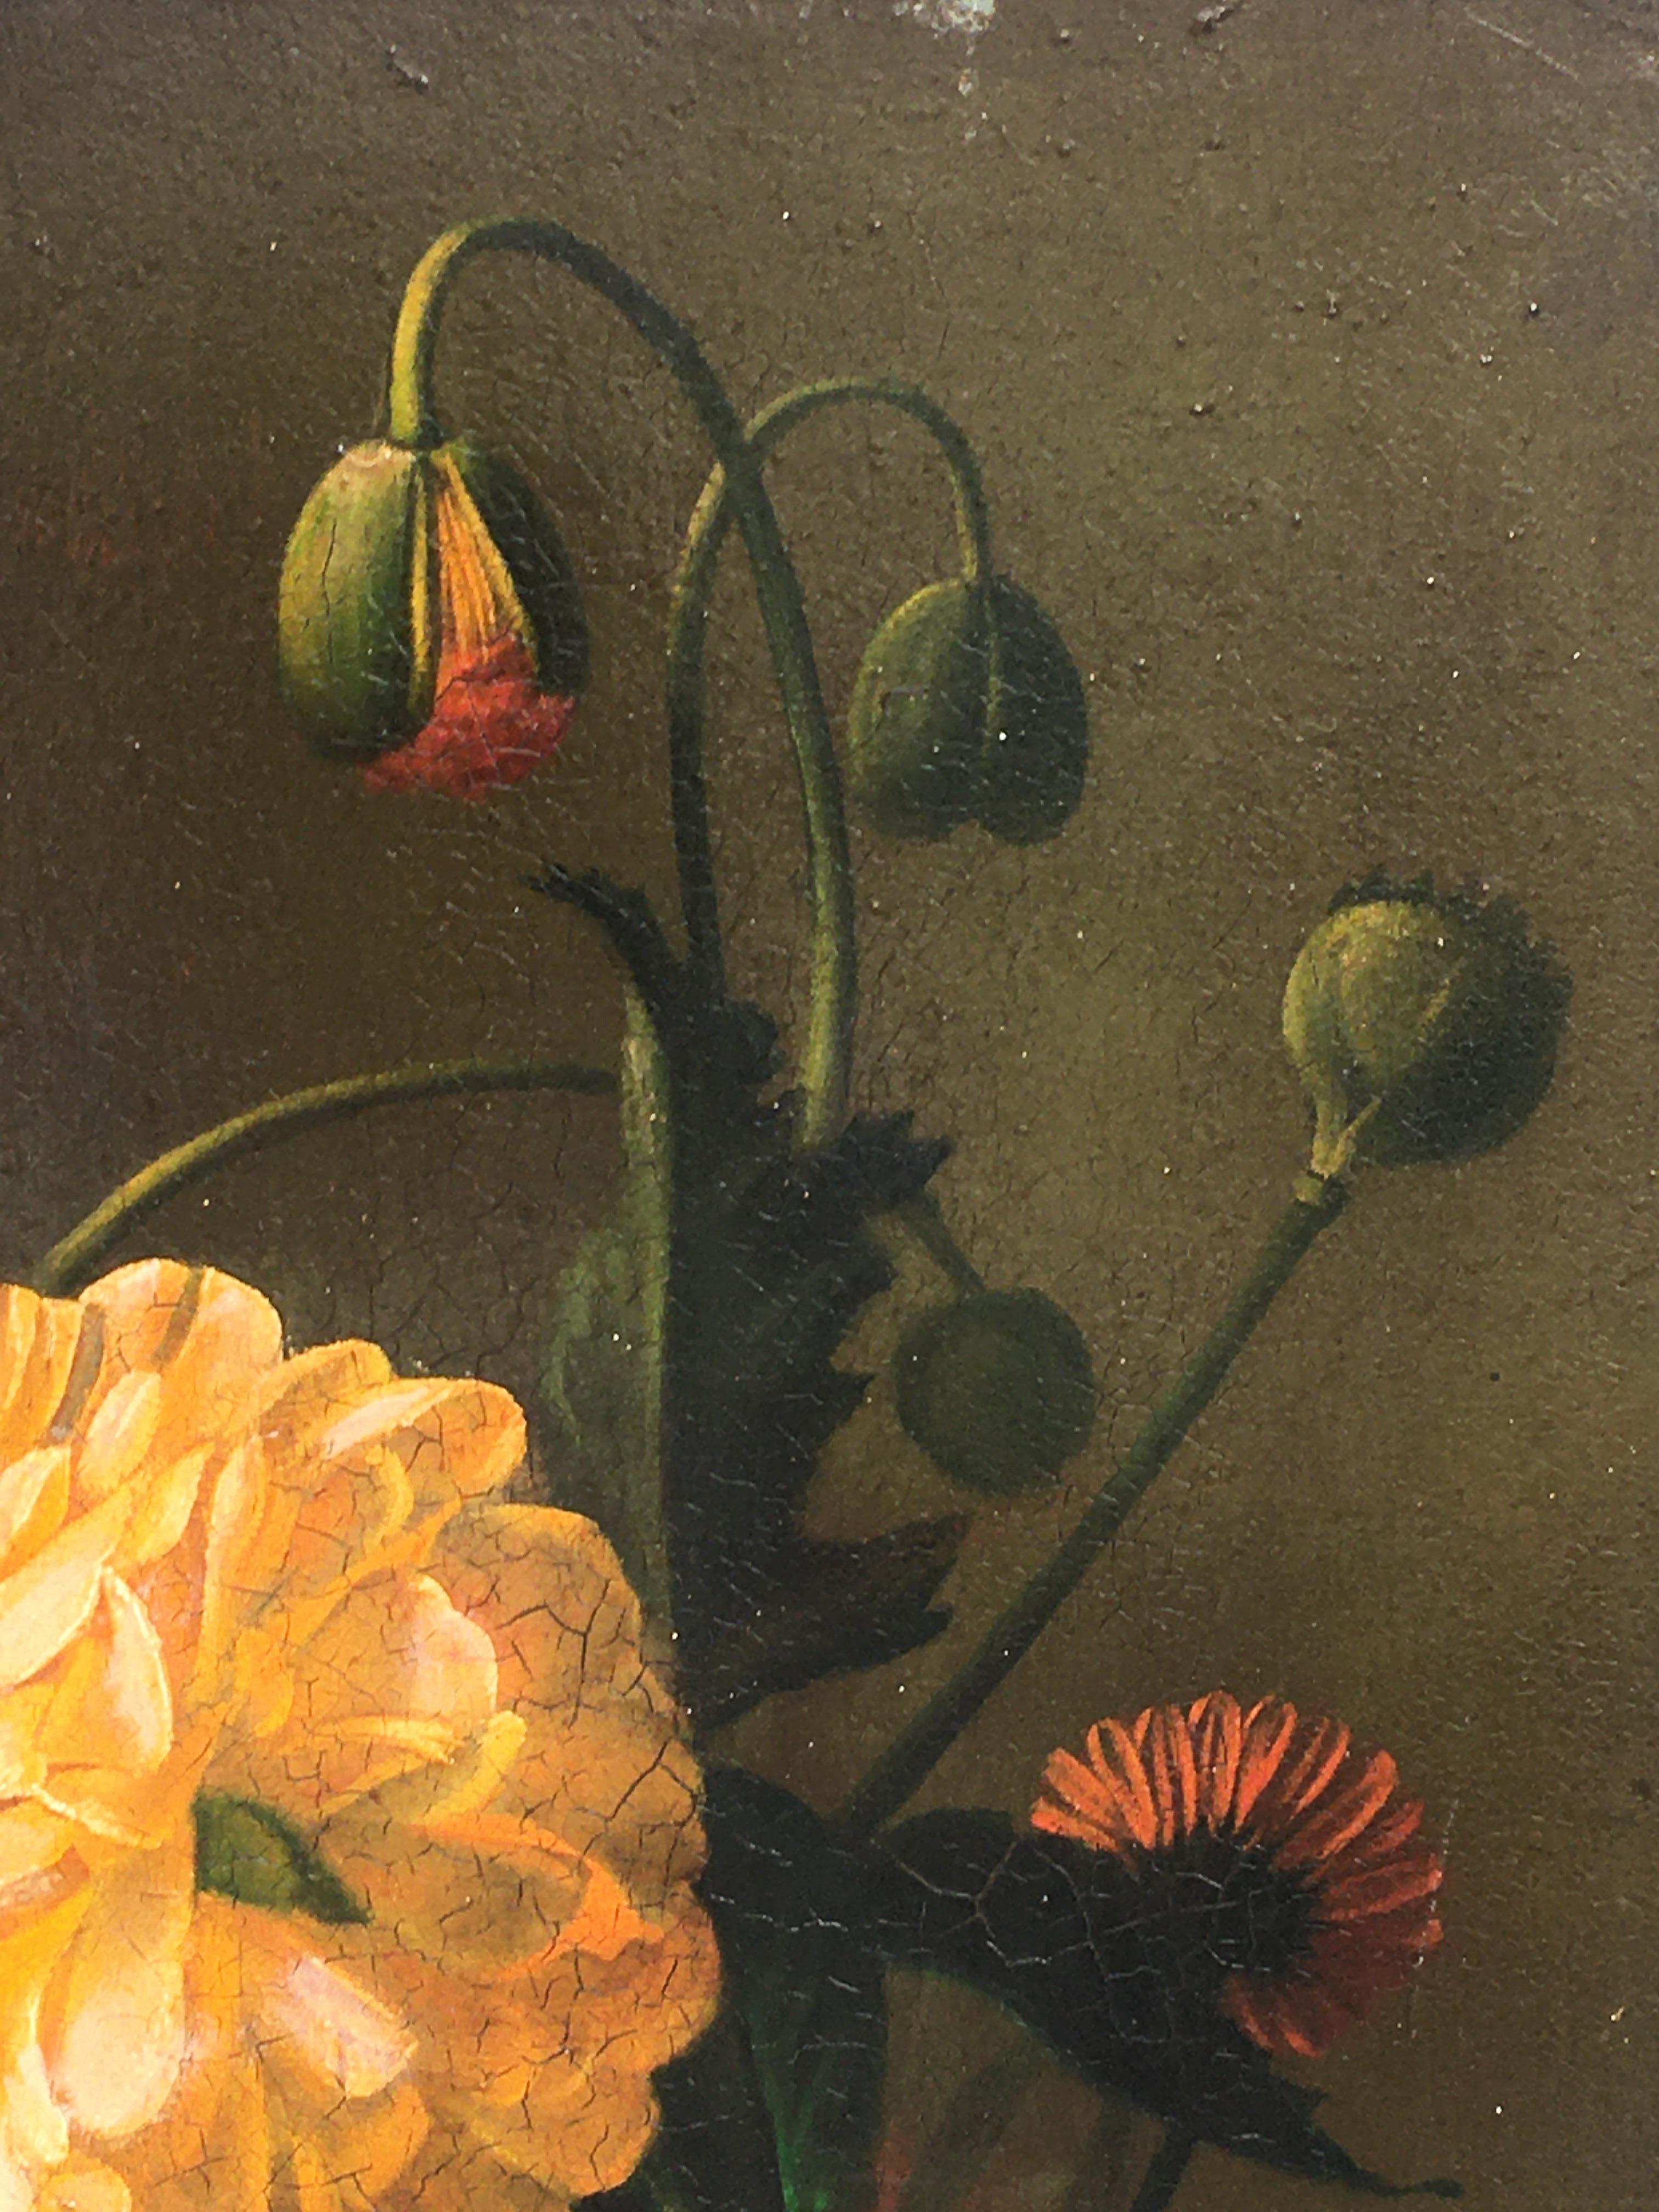 Flowers - Oil on canvas cm.80x60 by Maximilian Ciccone, Italy 2002.

In this oil on canvas painting the painter Ciccone draws inspiration from the masterpieces of the great Roman master Mario Nuzzi known as Mario dei Fiori, the greatest interpreter